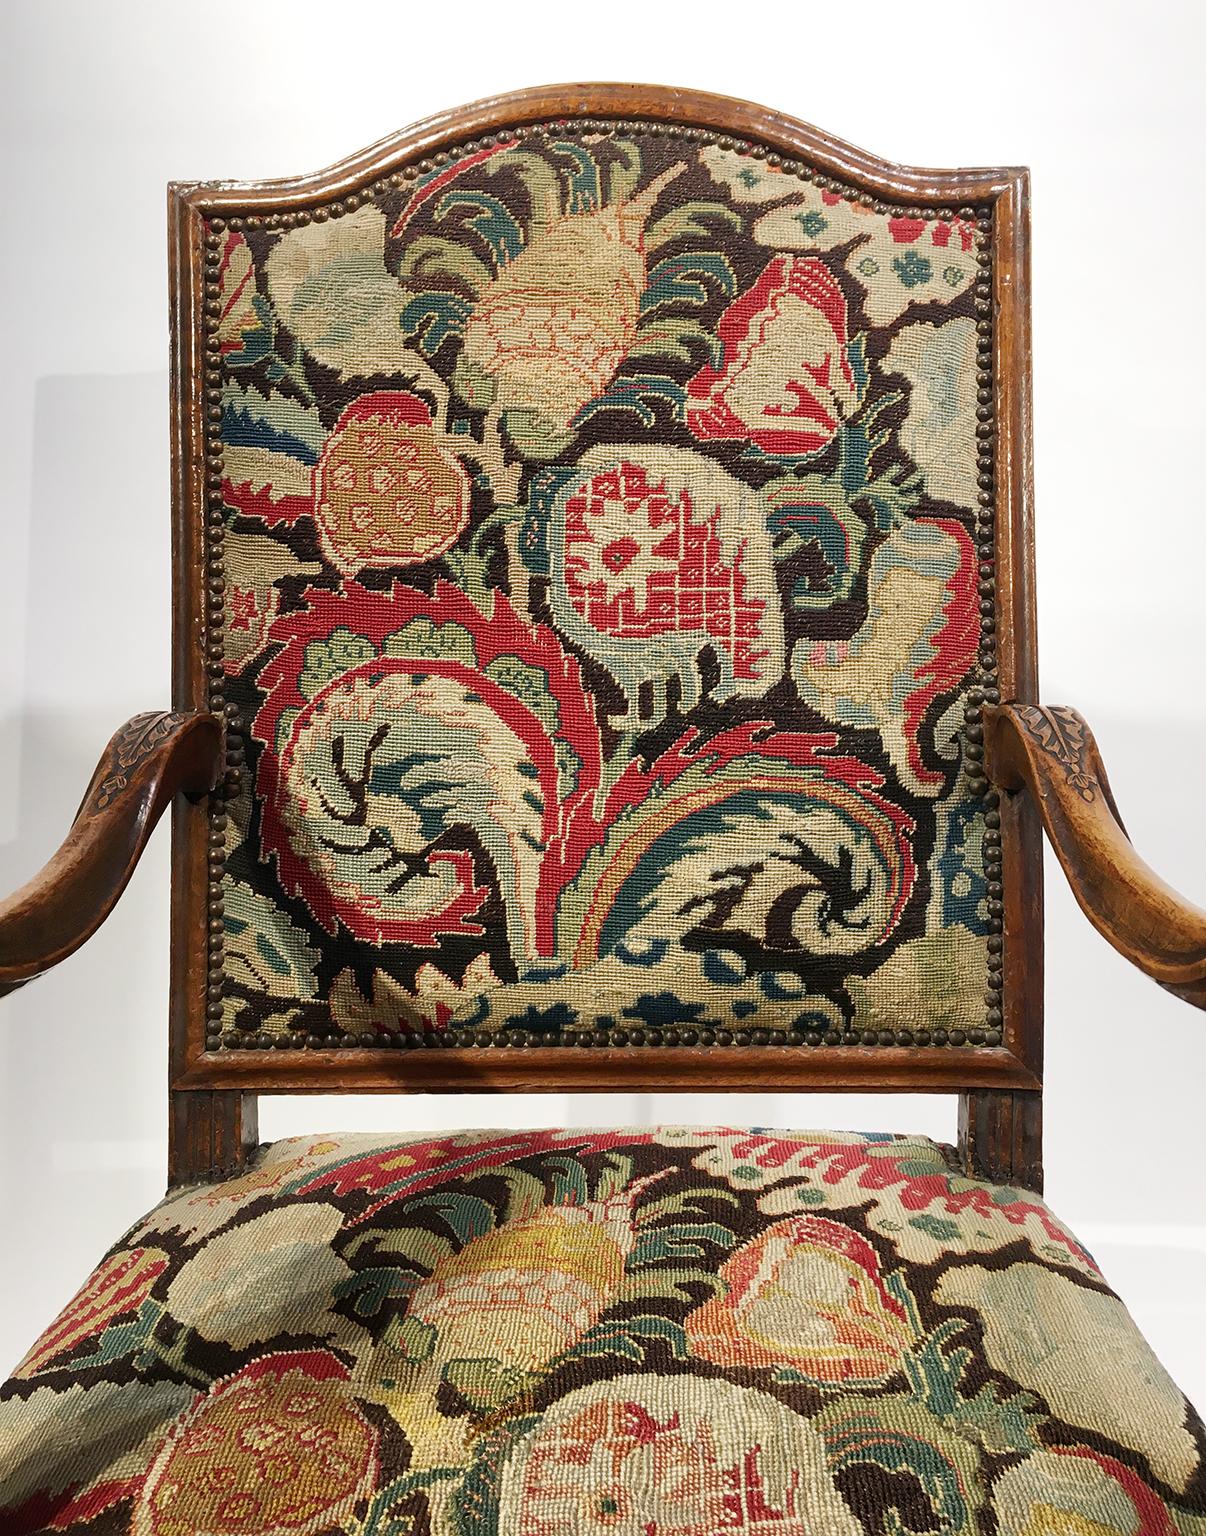 Baroque Pair of French Régence Armchairs with Petit Point Embroidery, France, circa 1725